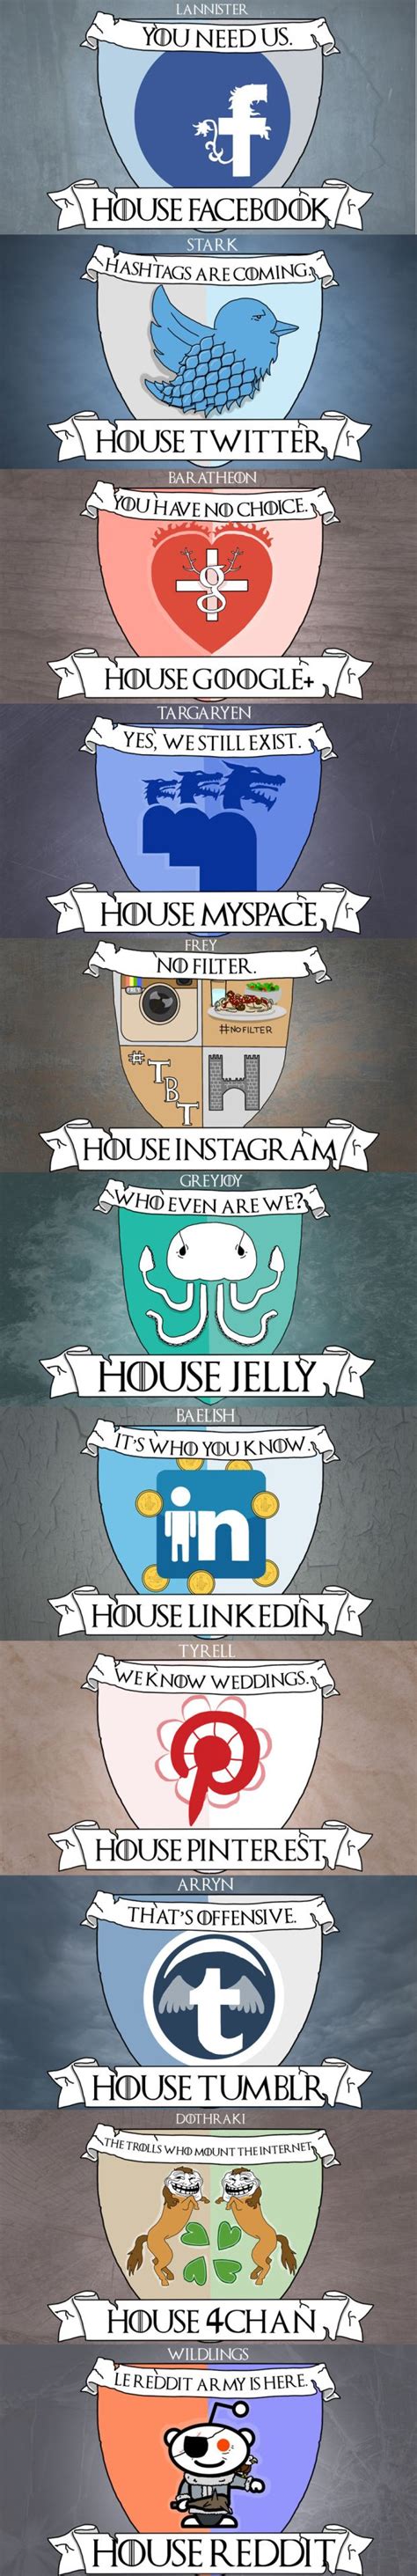 Social Media Game Of Thrones Simple Infographic Maker Tool By Easelly